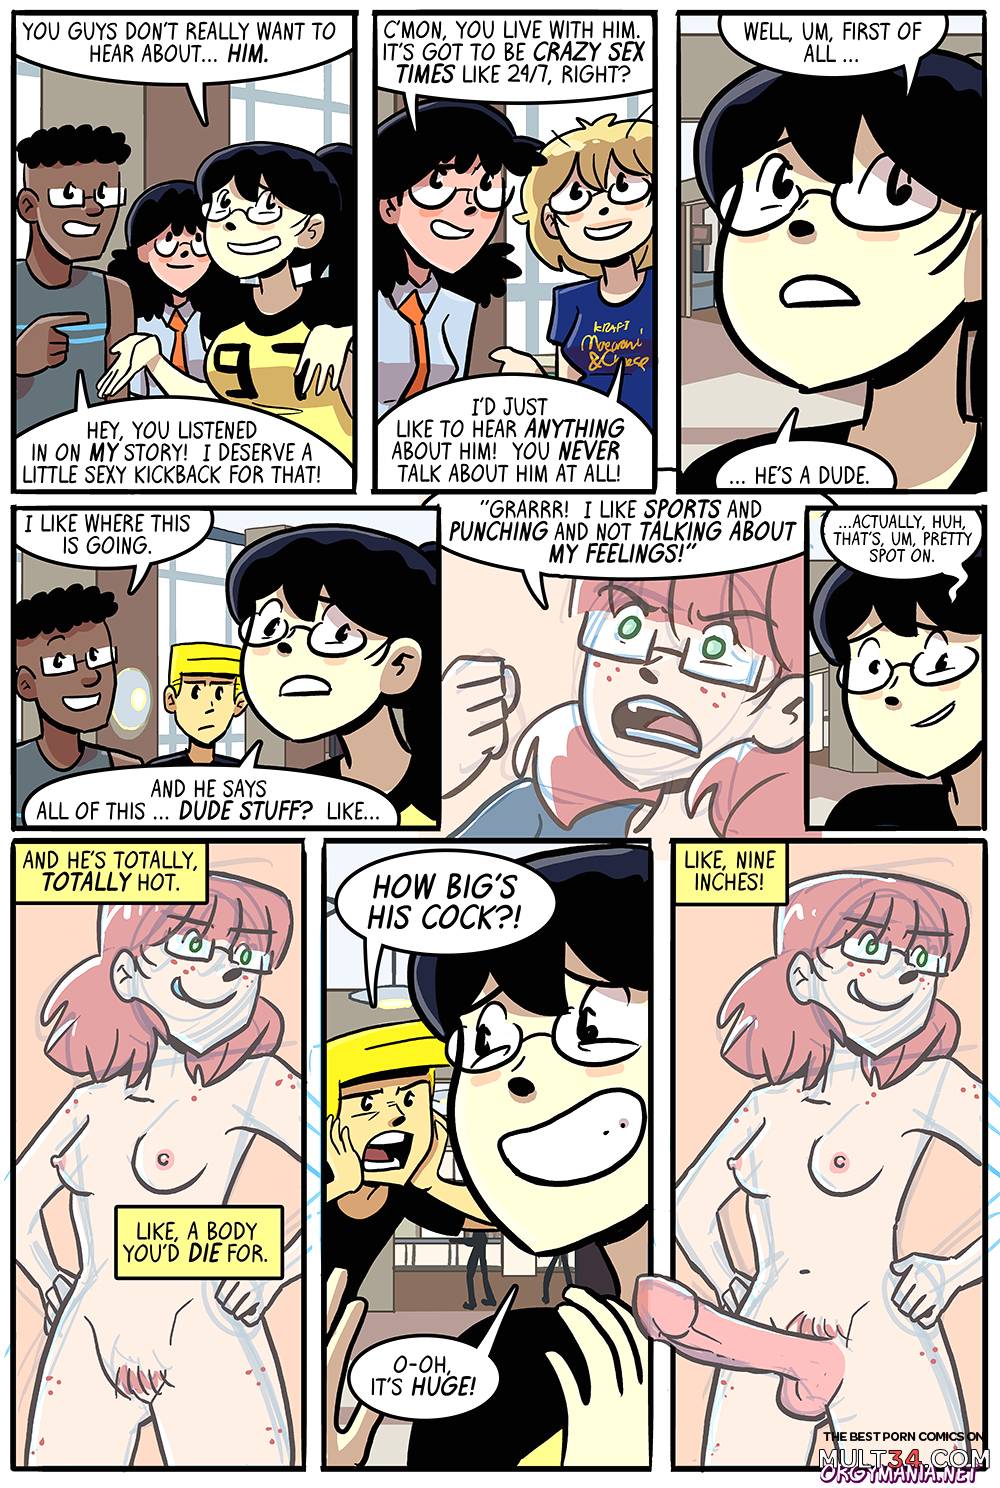 Walky Performs a Sex page 113